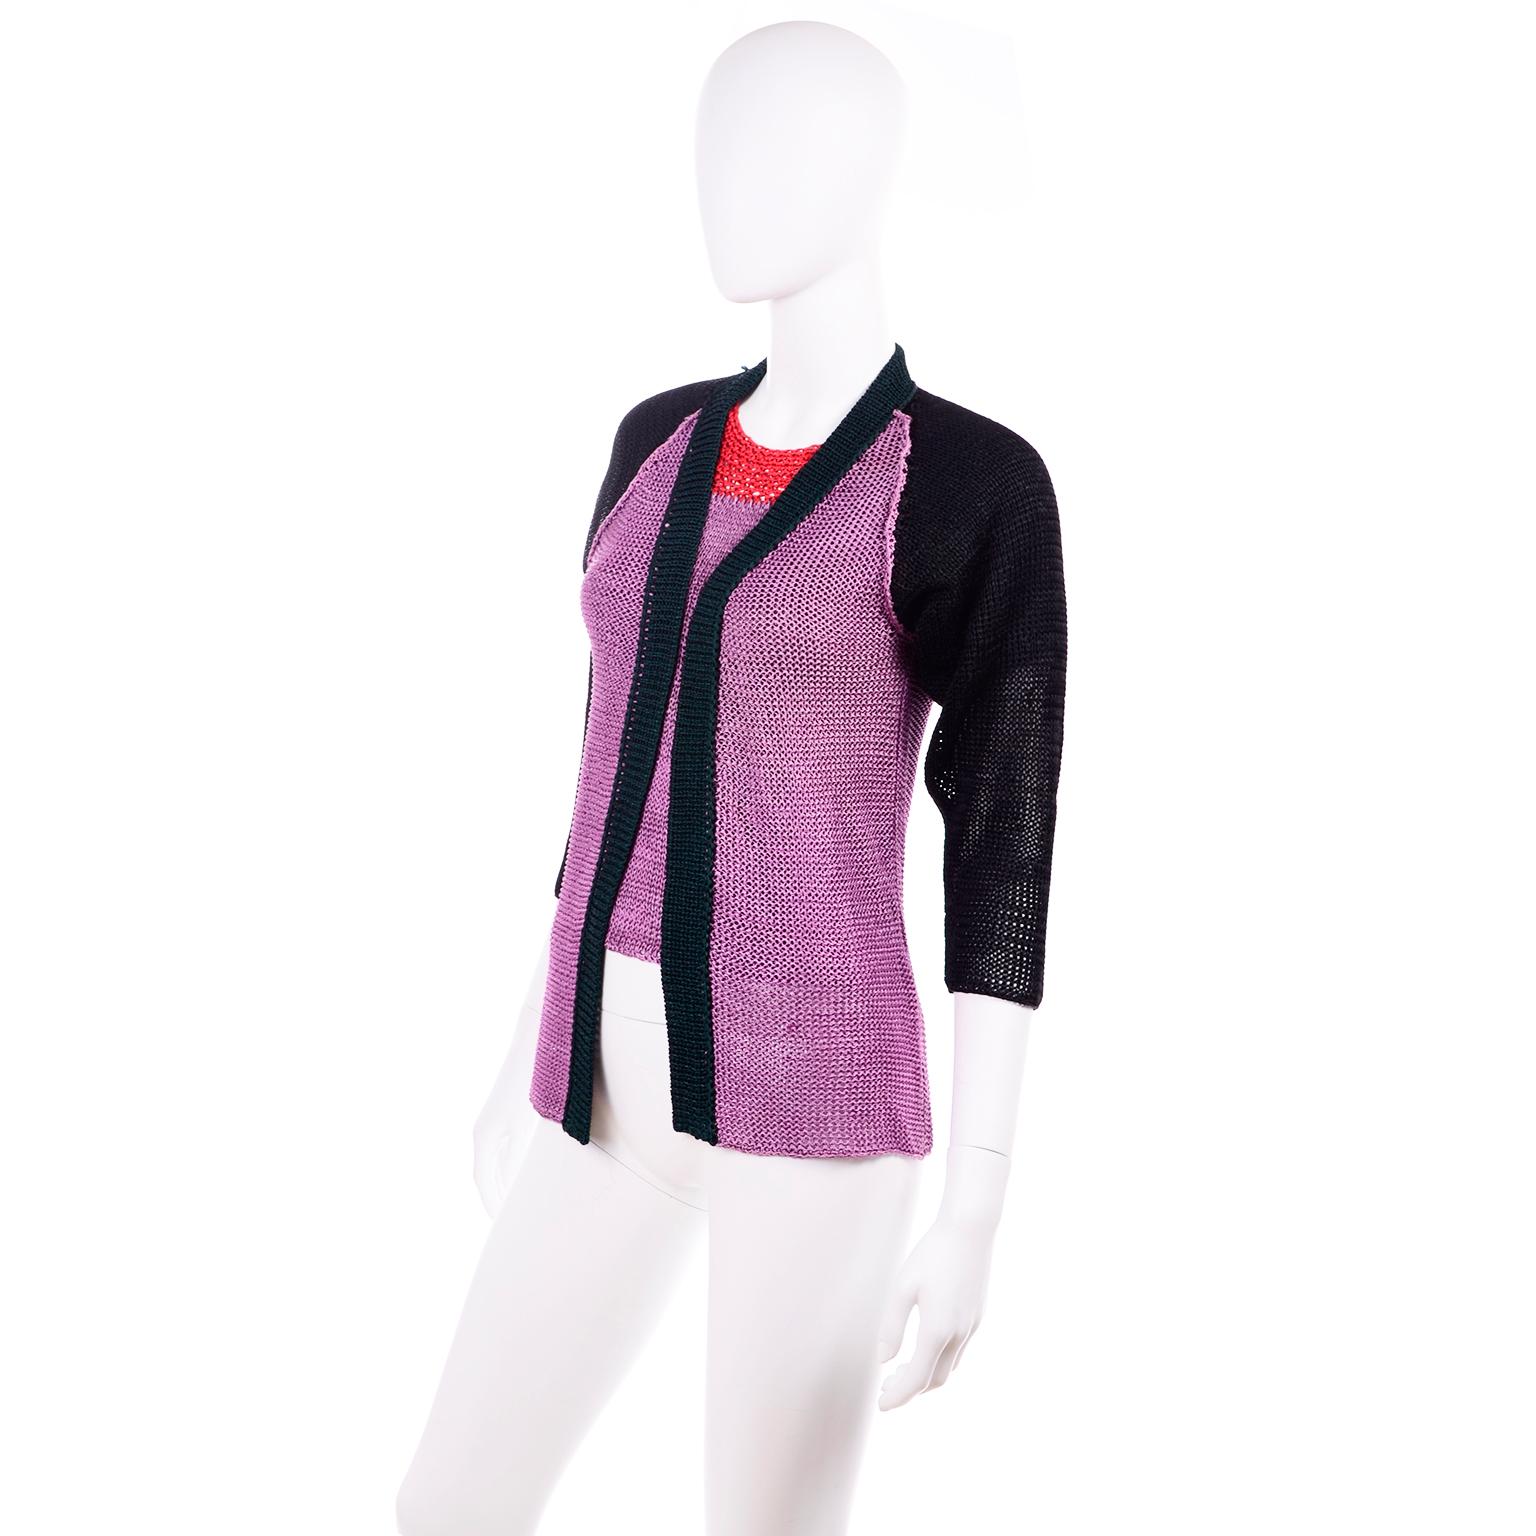 Vintage Charles Jourdan Parallele Color Block Purple 2 pc Top & Cardigan Sweater In Excellent Condition For Sale In Portland, OR